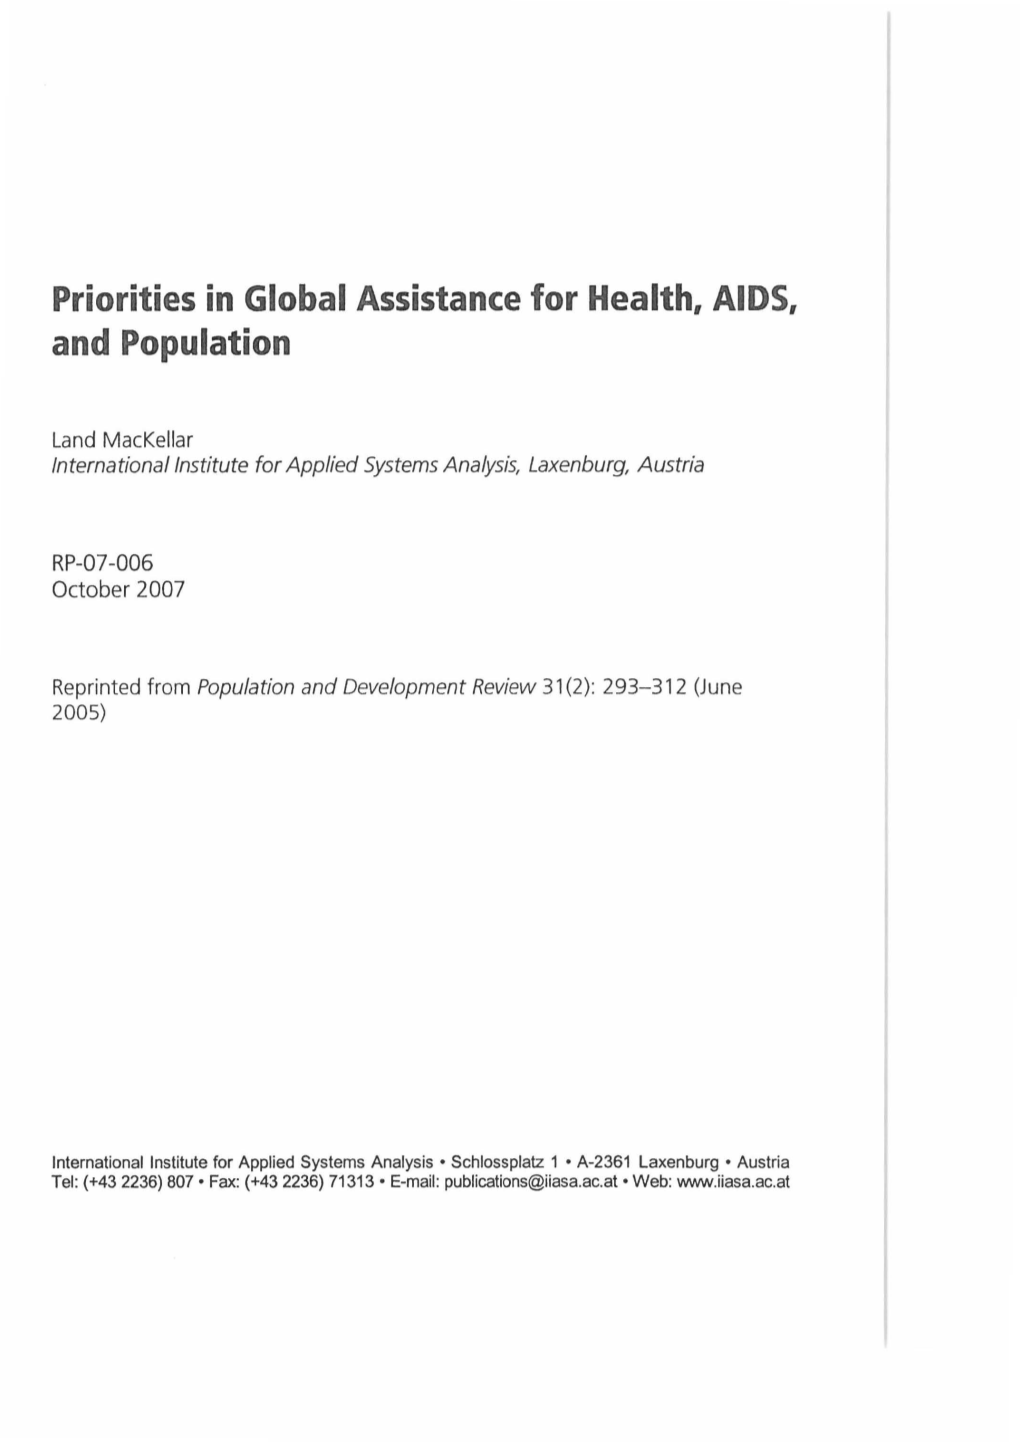 Priorities in Global Assistance for Health, AIDS, and Population